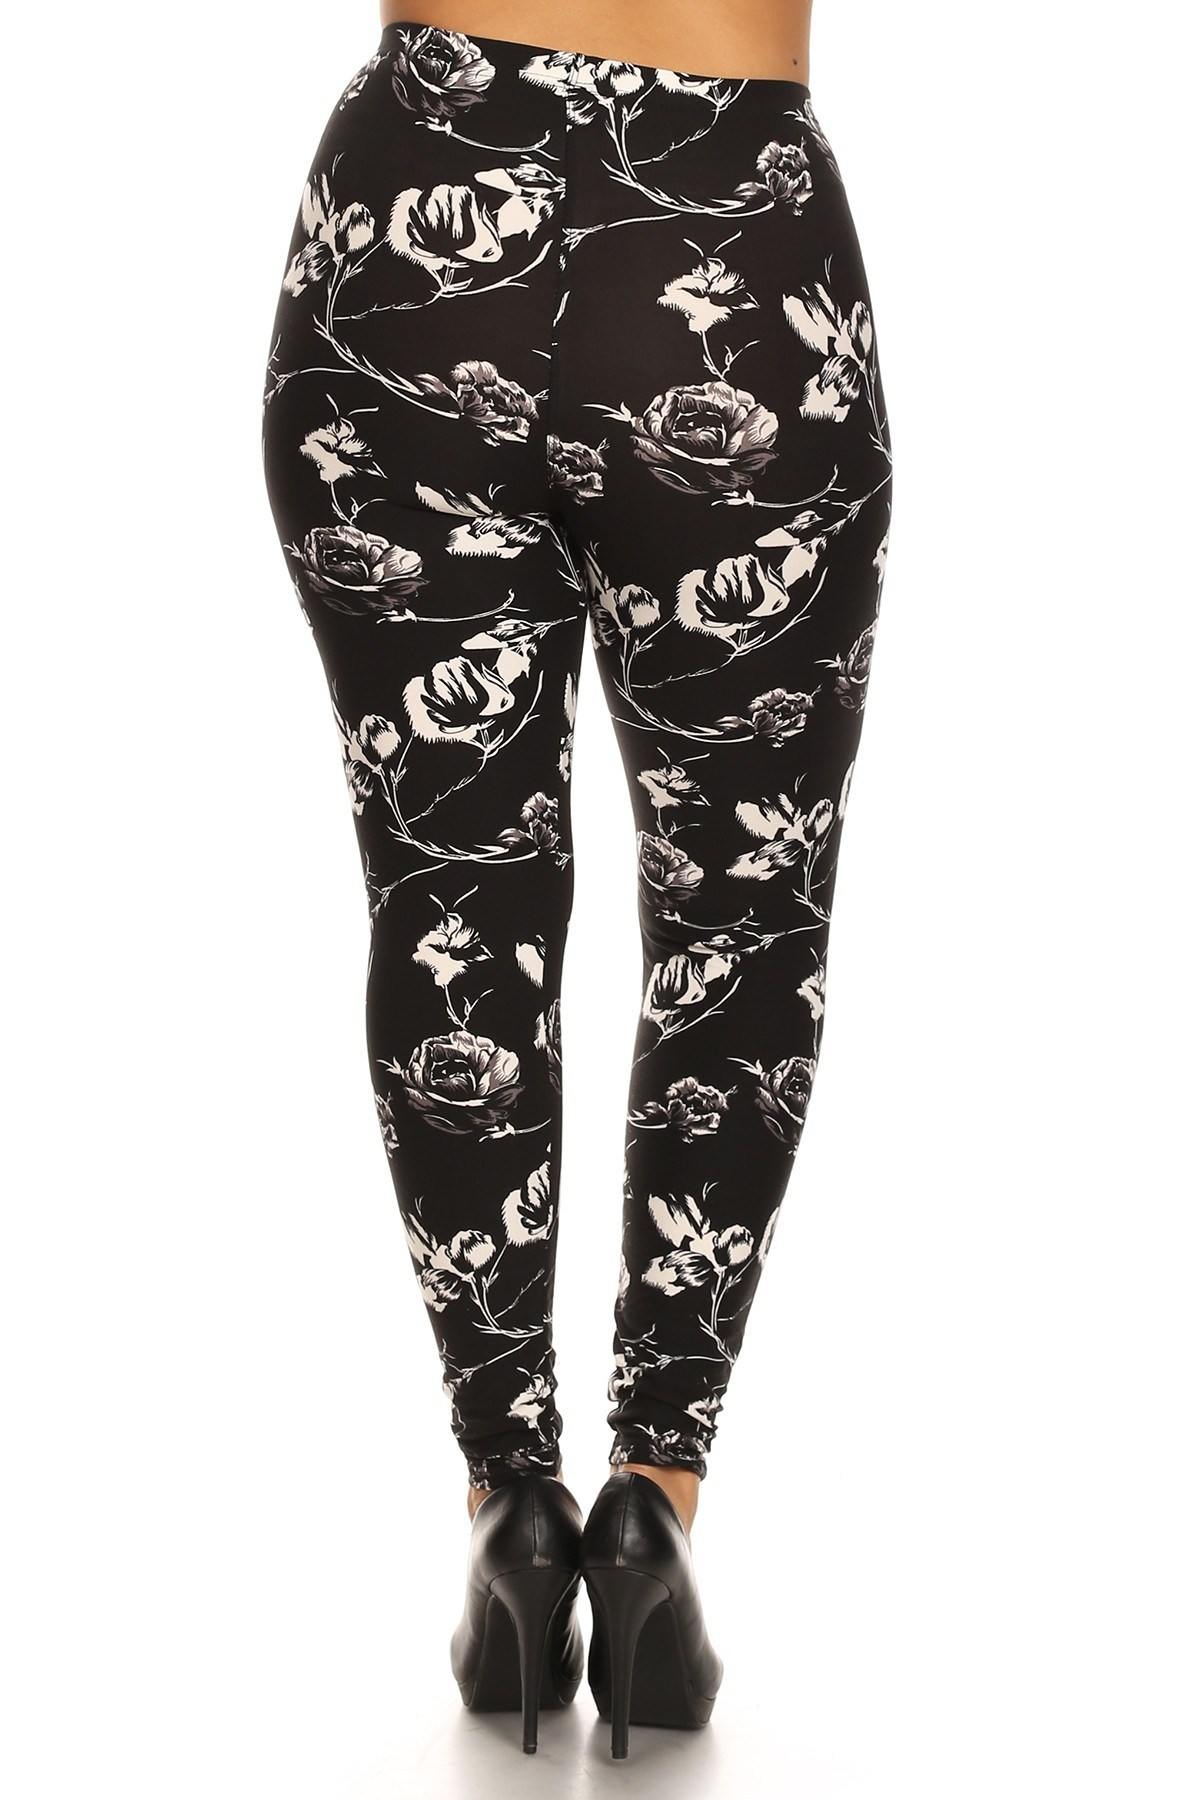 Plus Size Abstract Print, Full Length Leggings In A Slim Fitting Style With A Banded High Waist - Pearlara